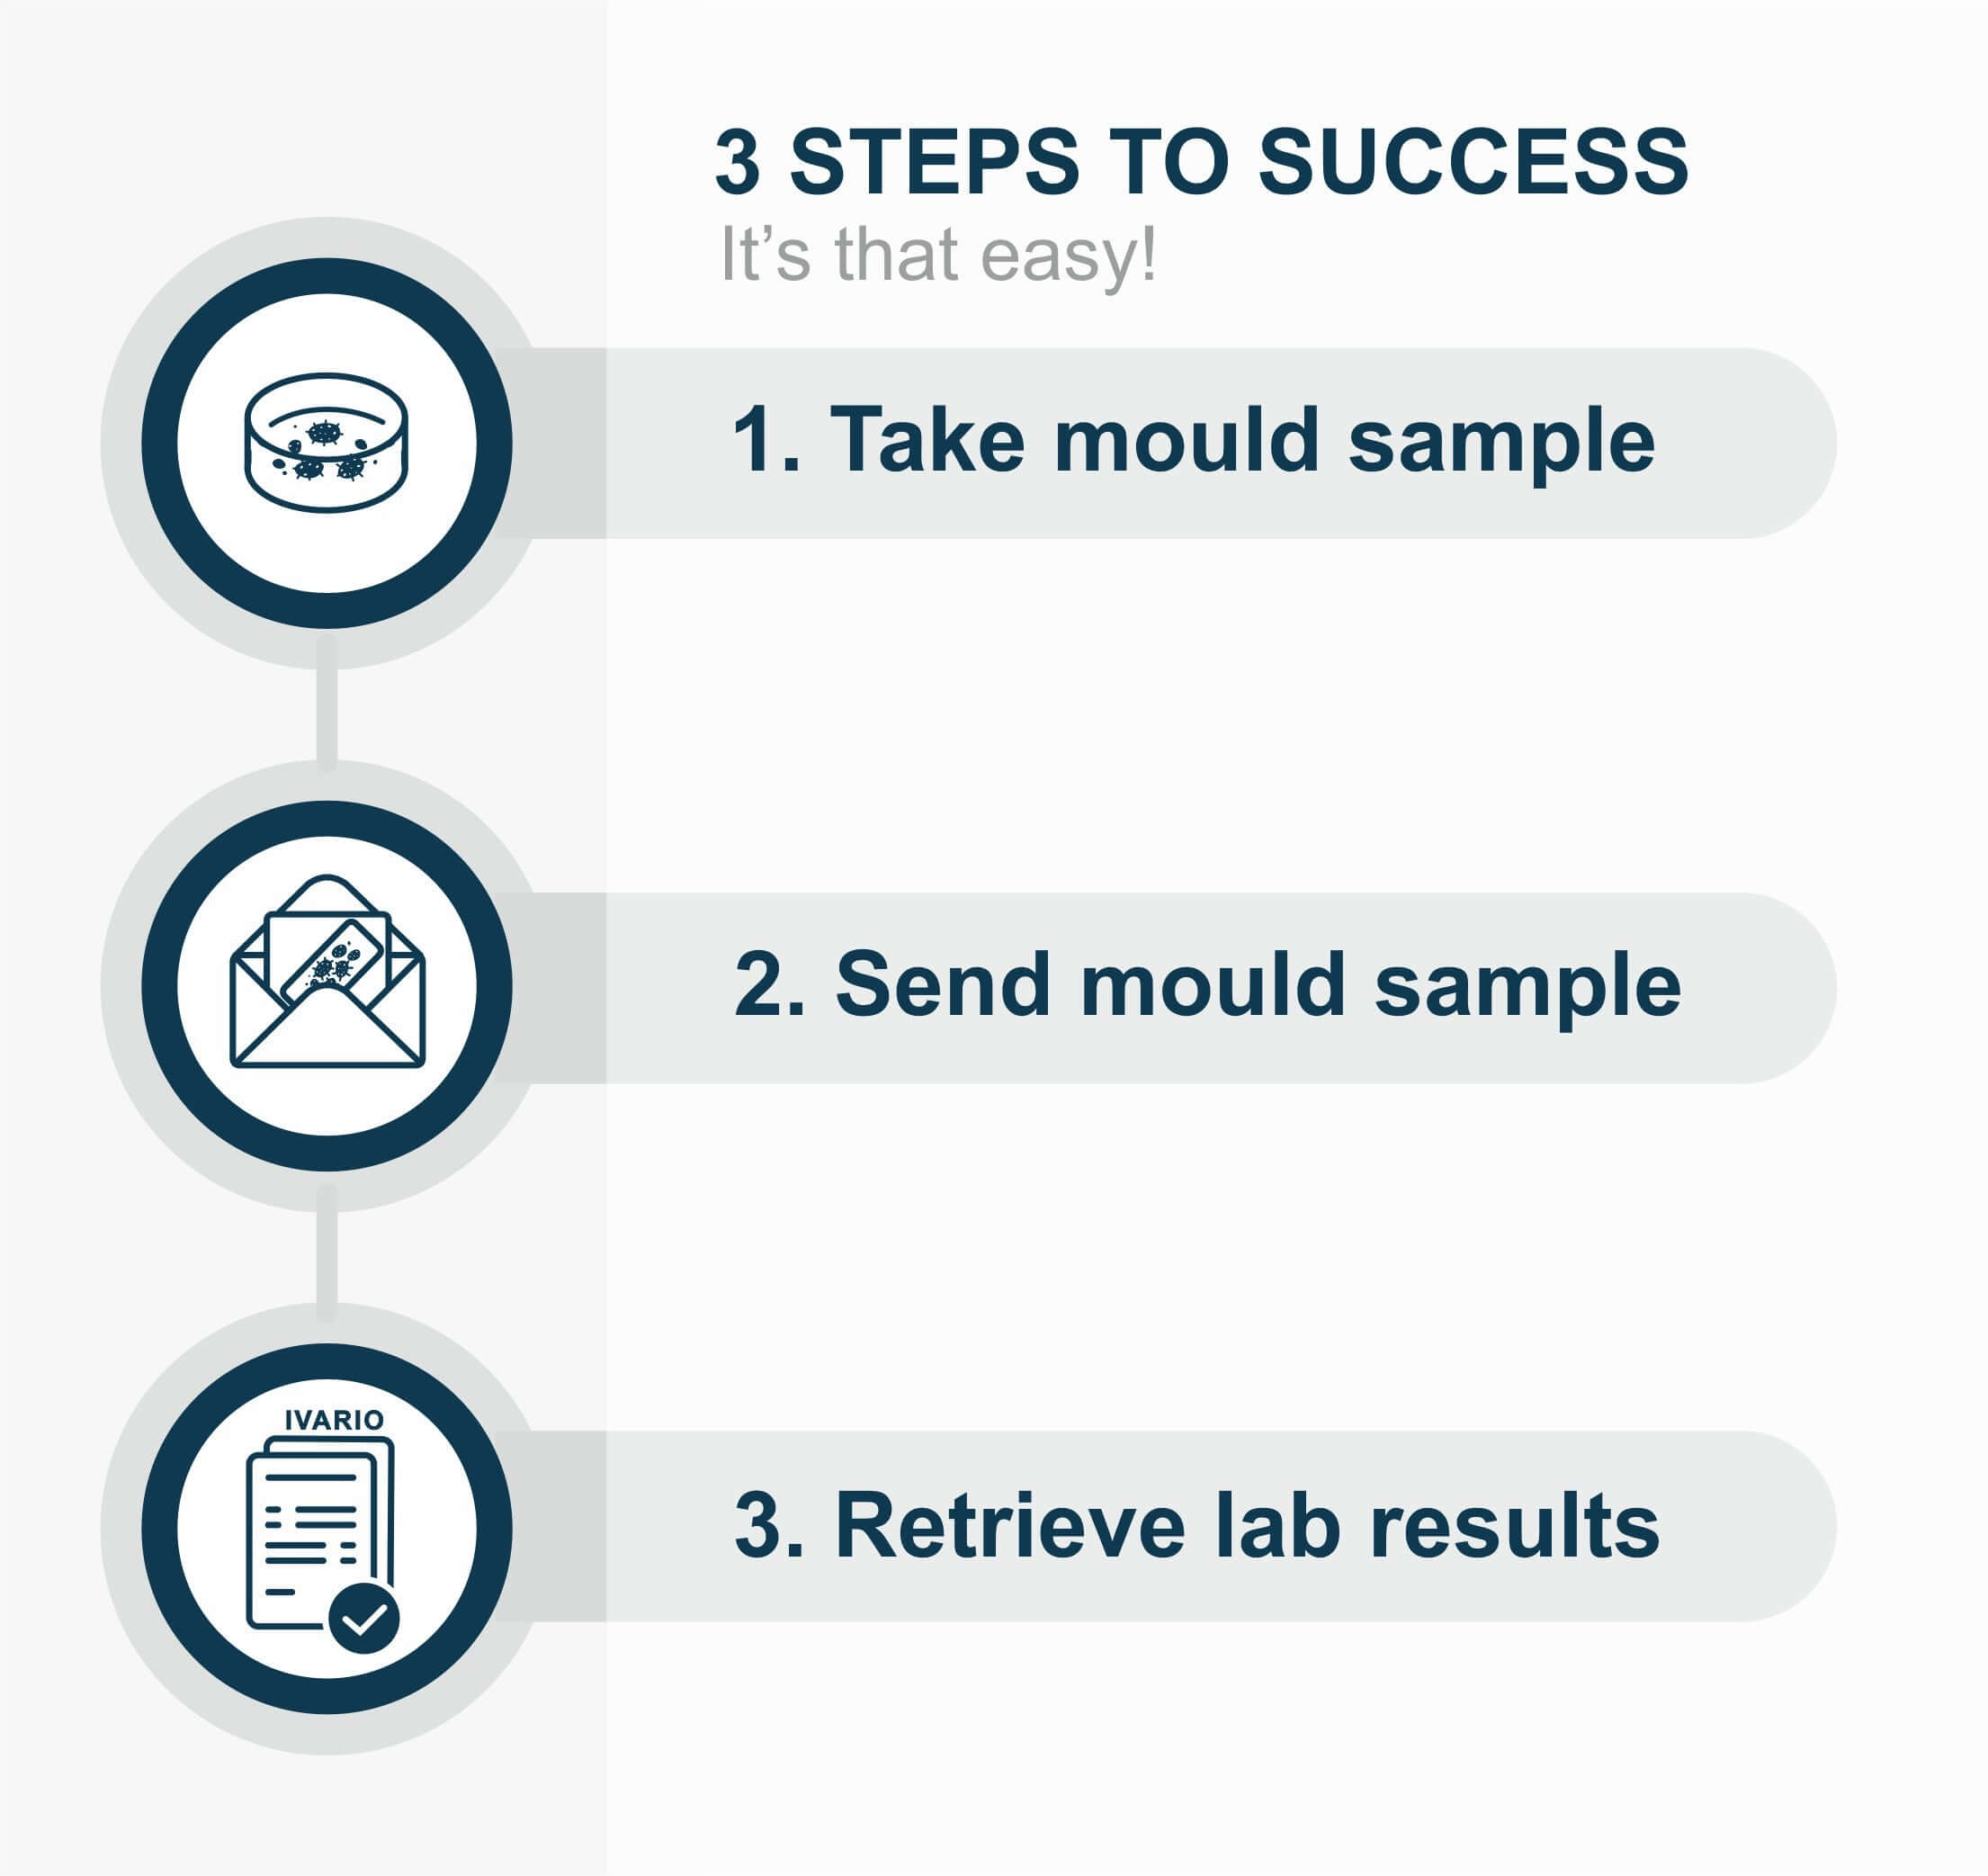 Three easy steps are needed to complete the Mould test